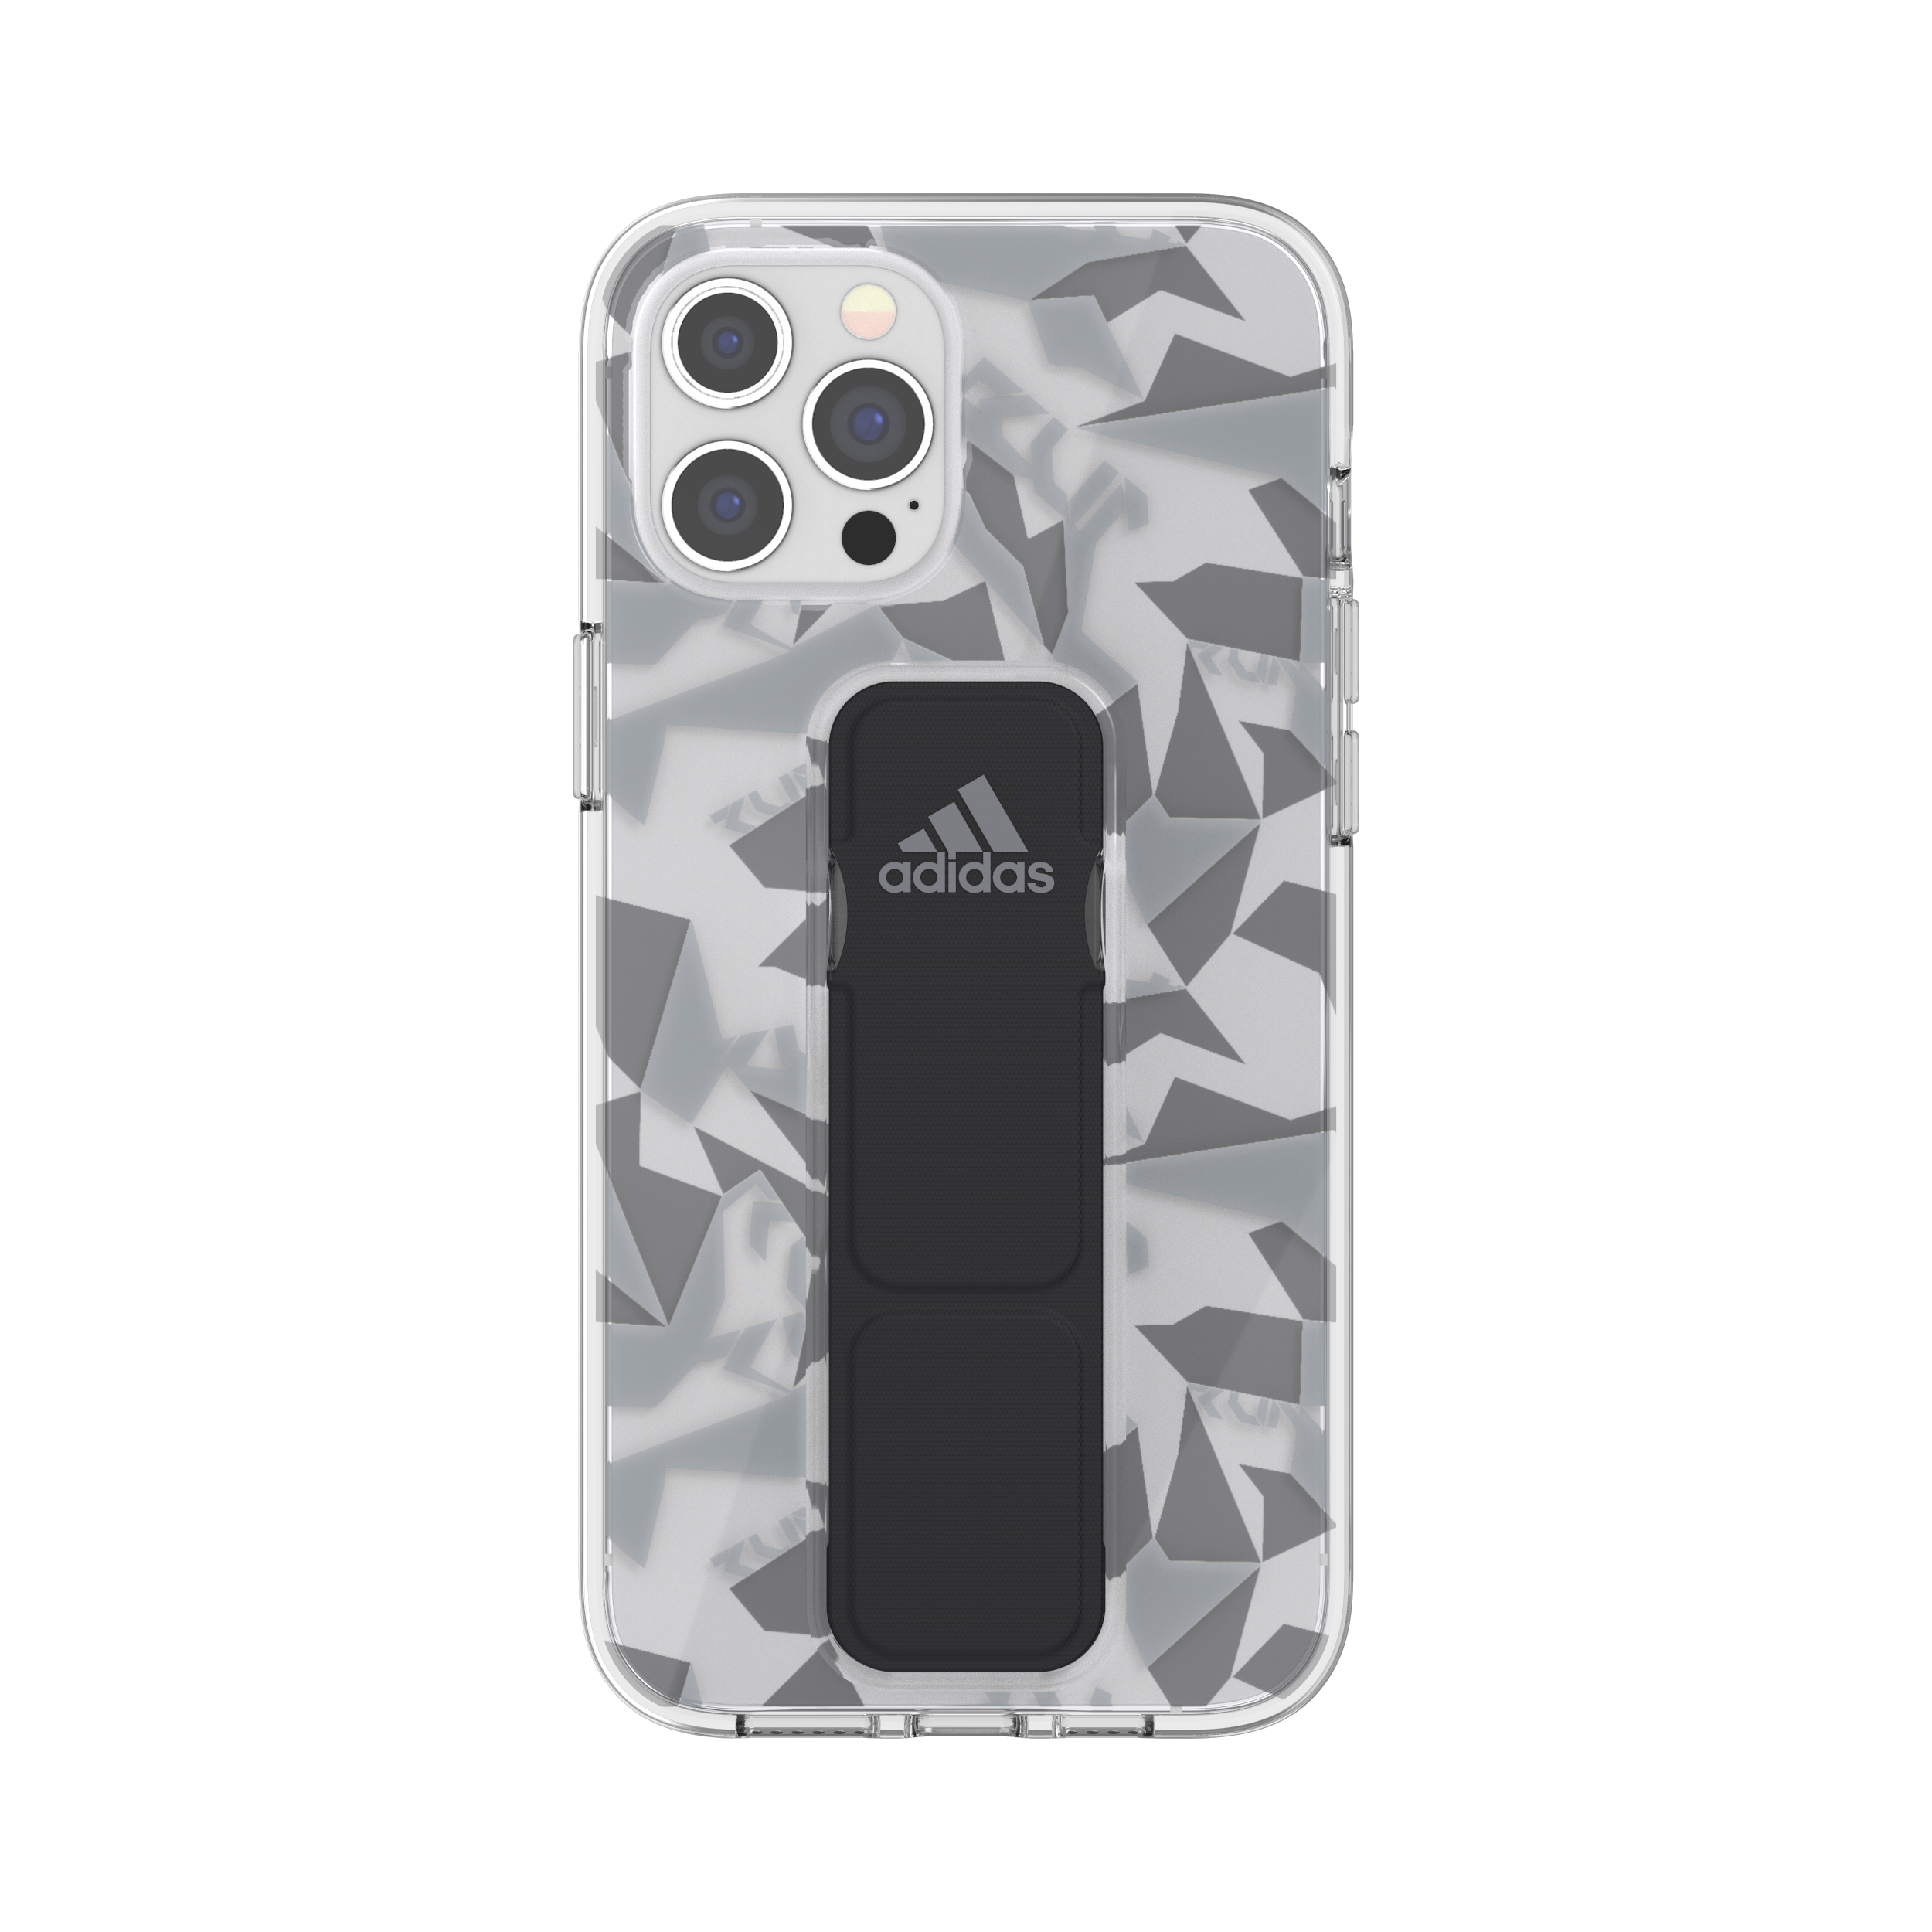 adidas SPORT Apple iPhone 12 Pro Max Clear Grip Case - Back cover w/ Grip or Stand, Scratch & Drop Protection w/ TPU Bumper, Wireless Charging Compatible - Grey/Black